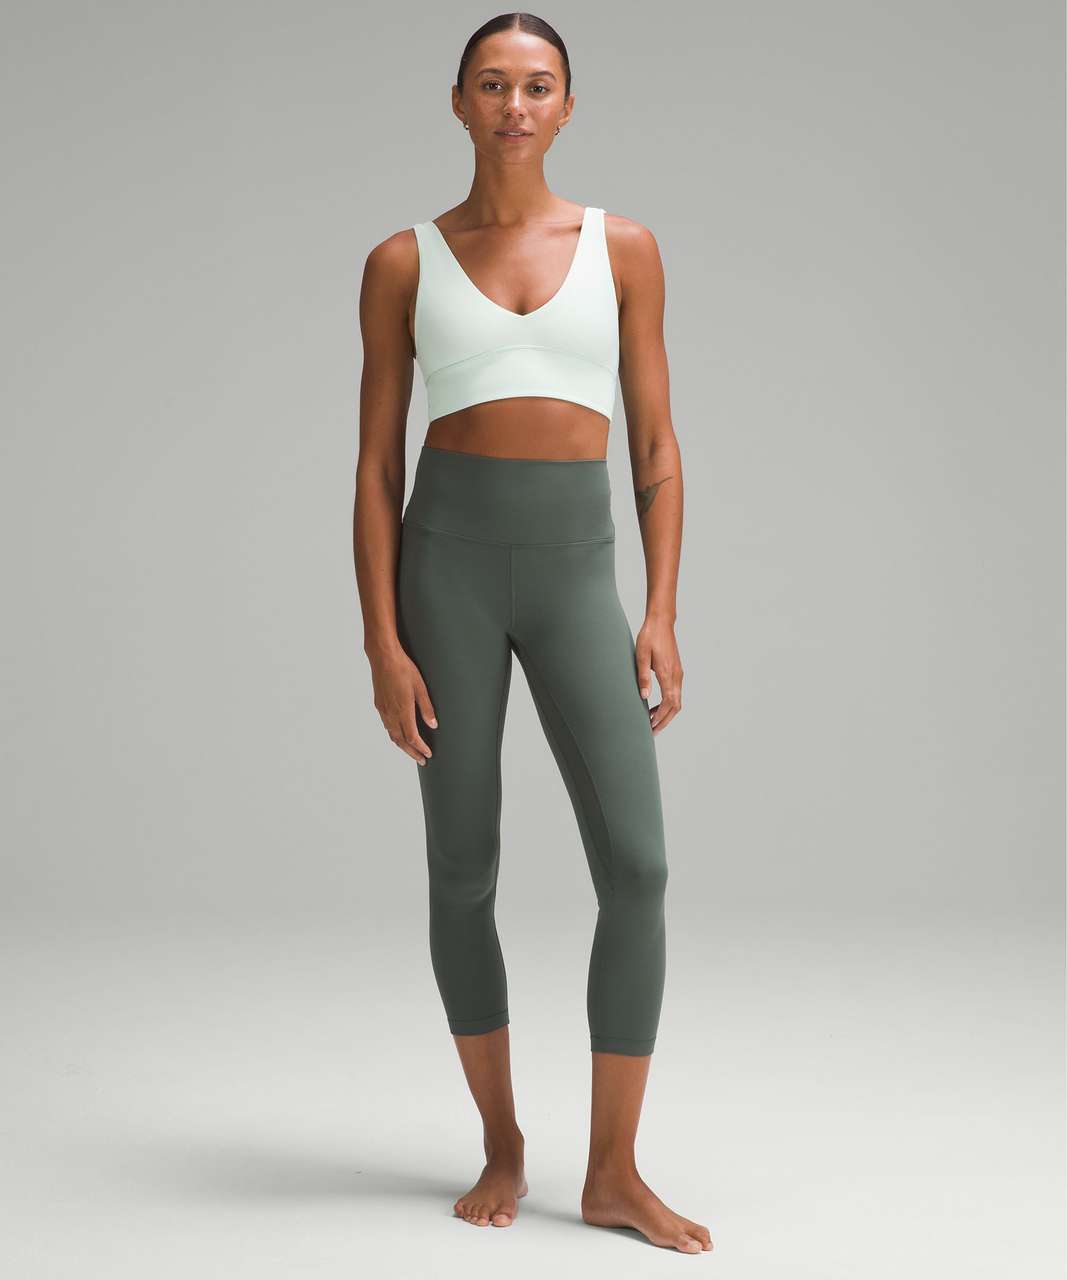 lululemon has THE top of #summer. Come and get it. The Align V-Neck B